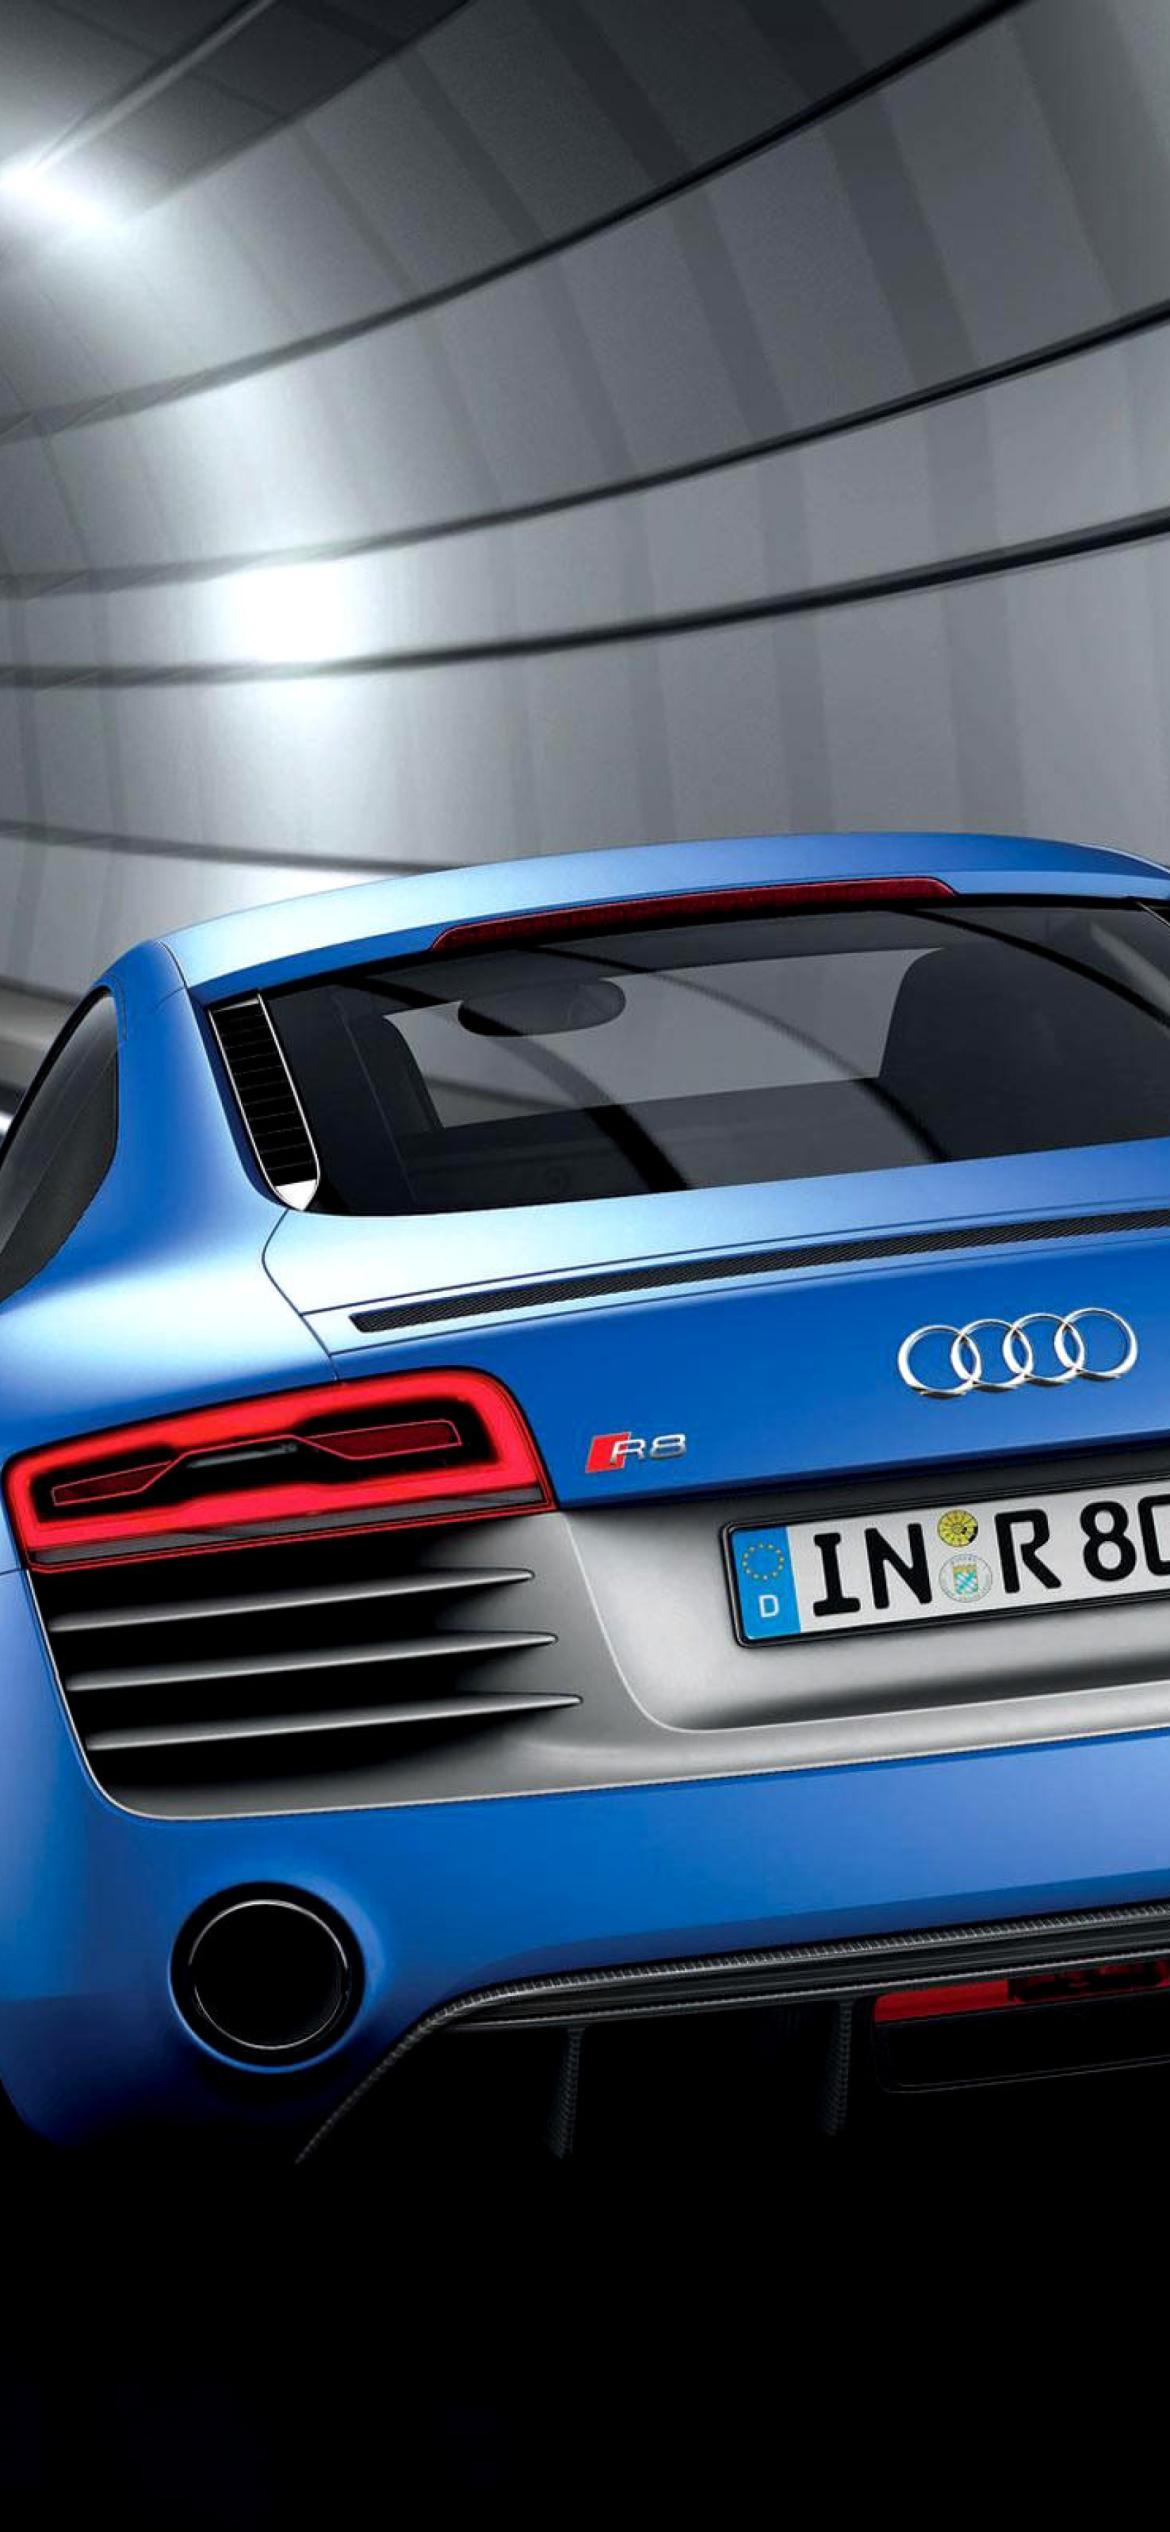 Audi R8 Coupe v10 Wallpaper for iPhone 12 Pro